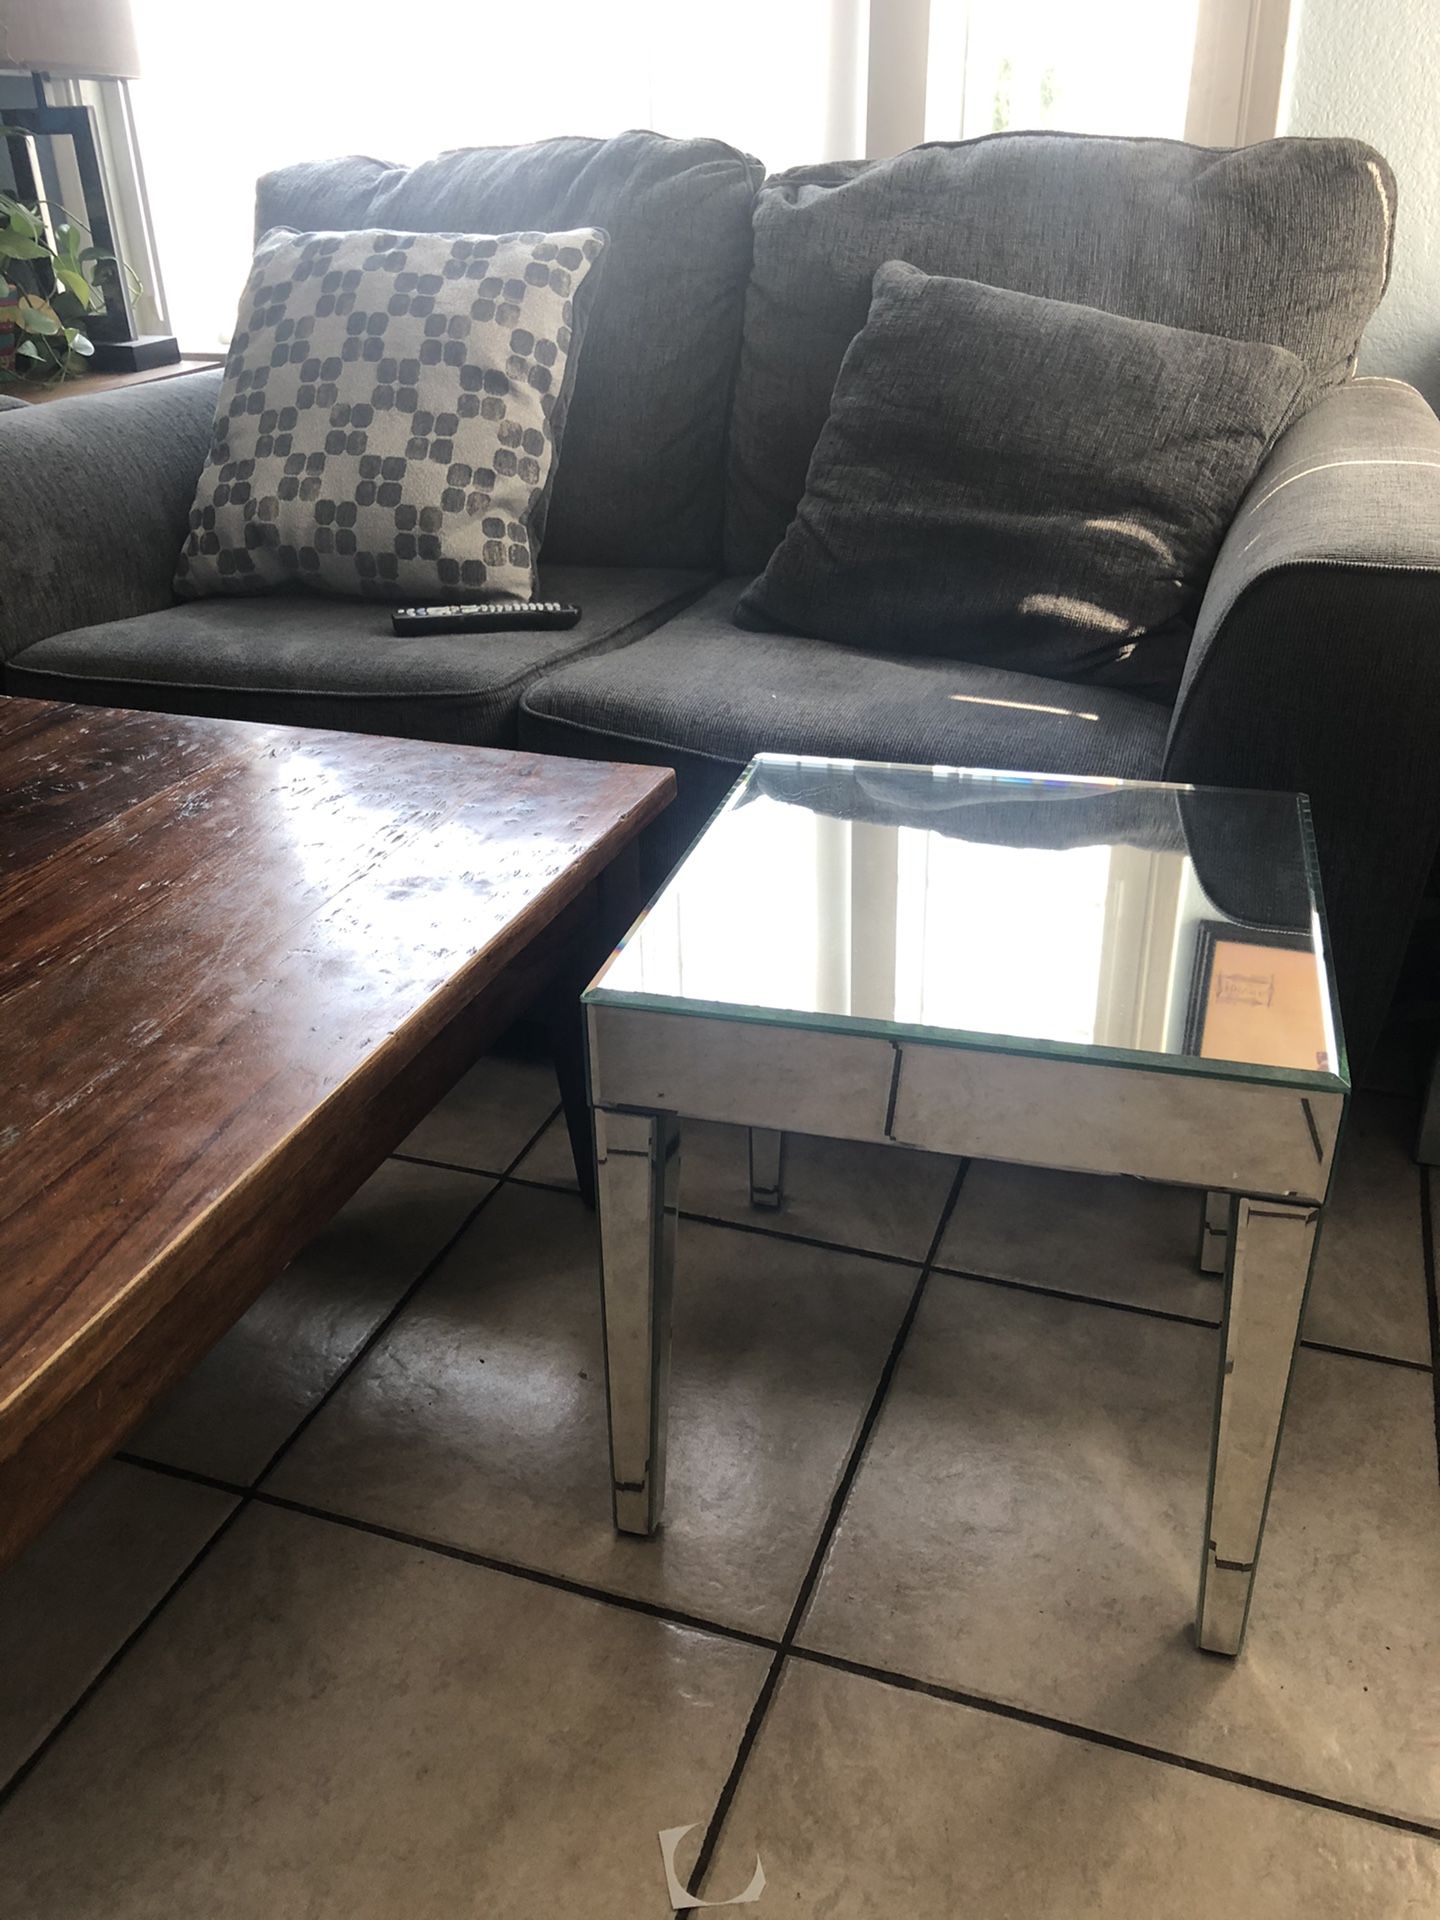 Side mirrored tables